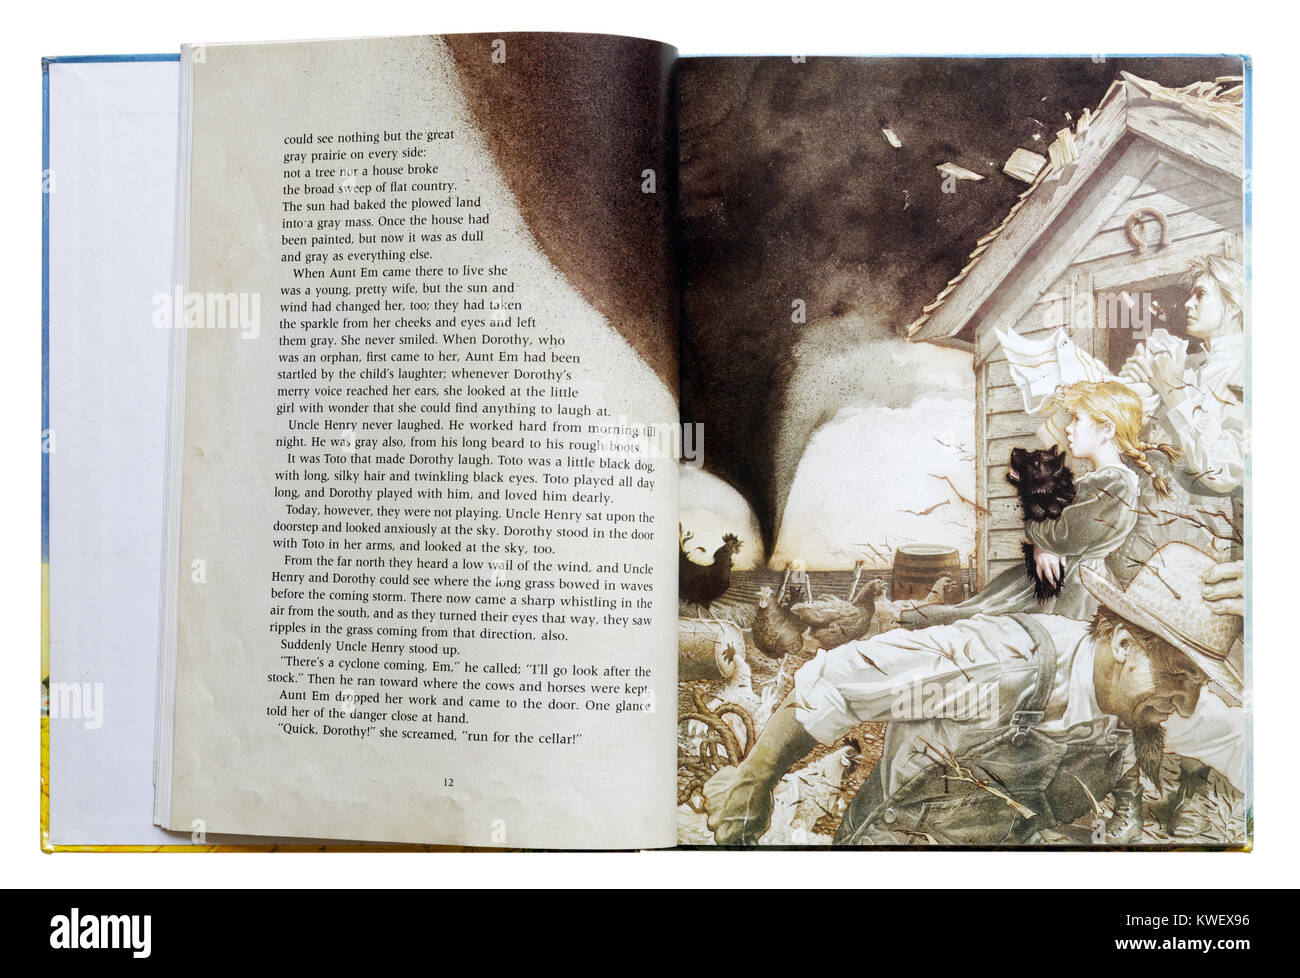 The house being picked up in the tornado in an Illustrated book of The Wizard of Oz Stock Photo